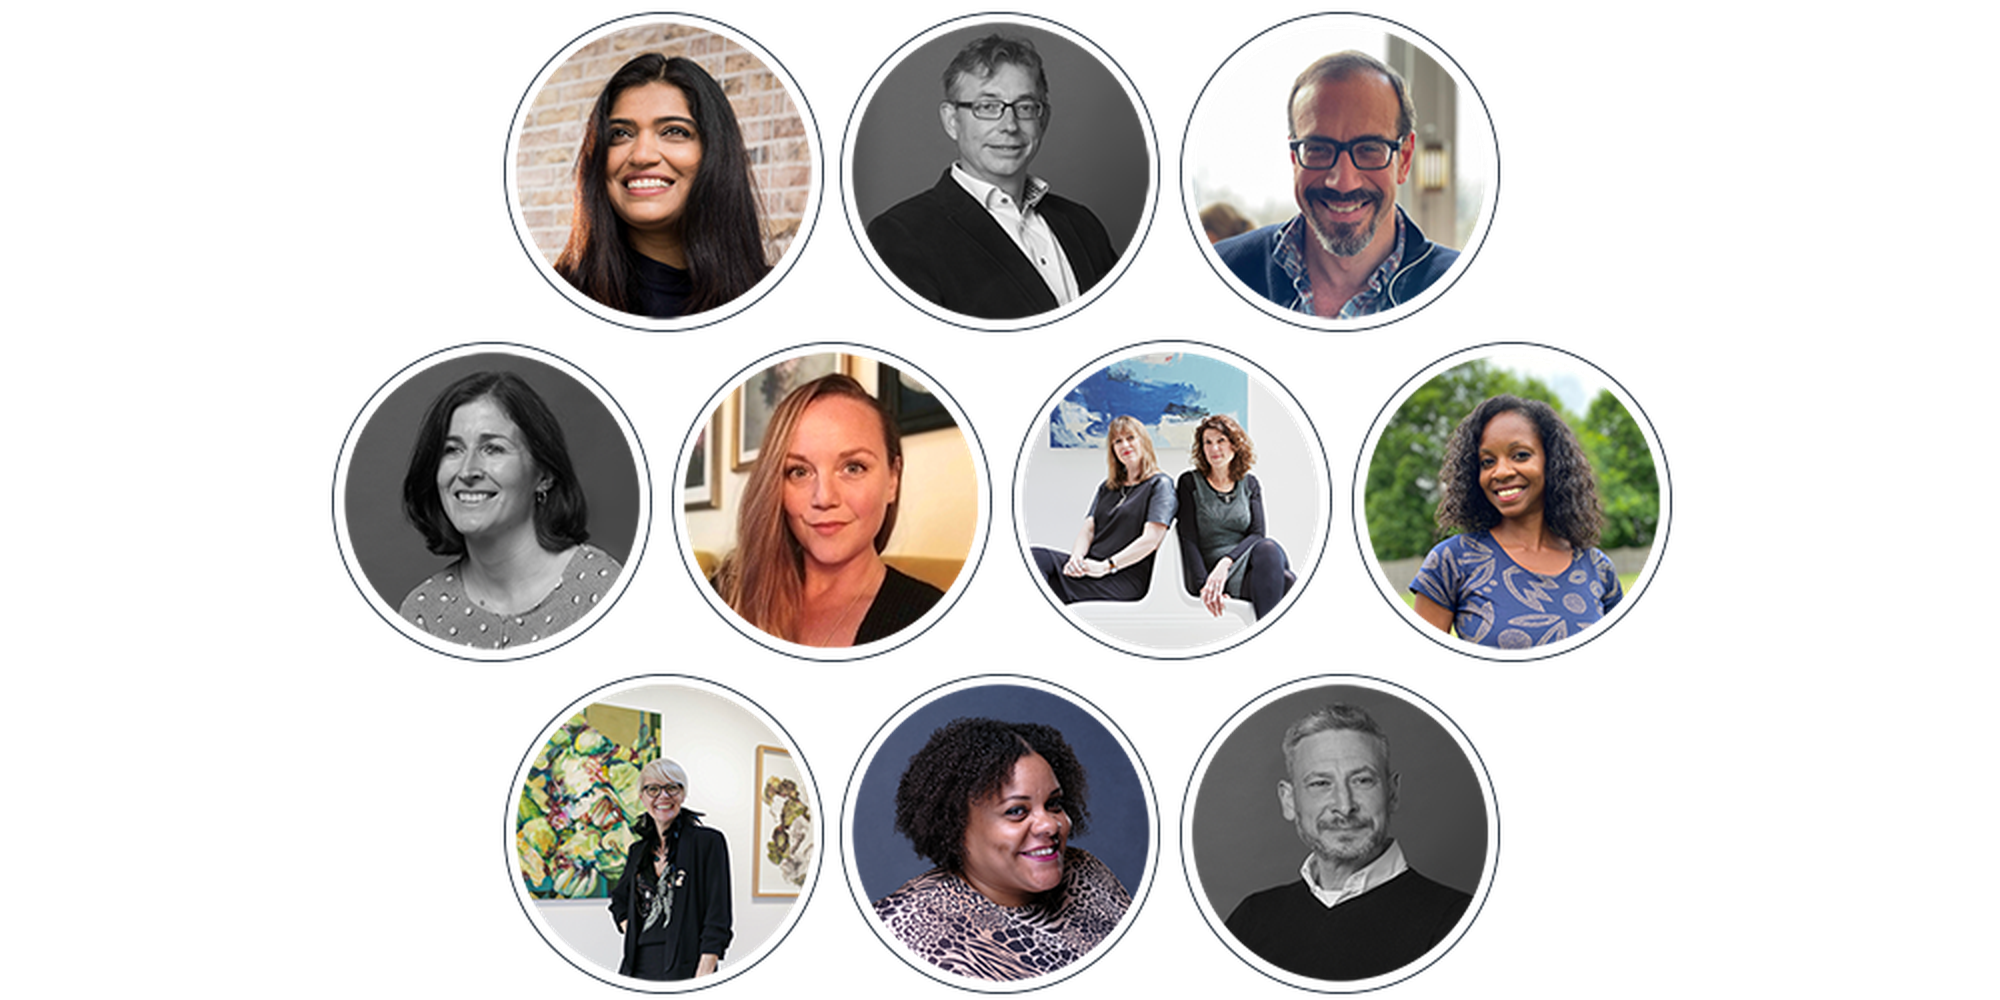 Introducing: Our new Curatorial Board members